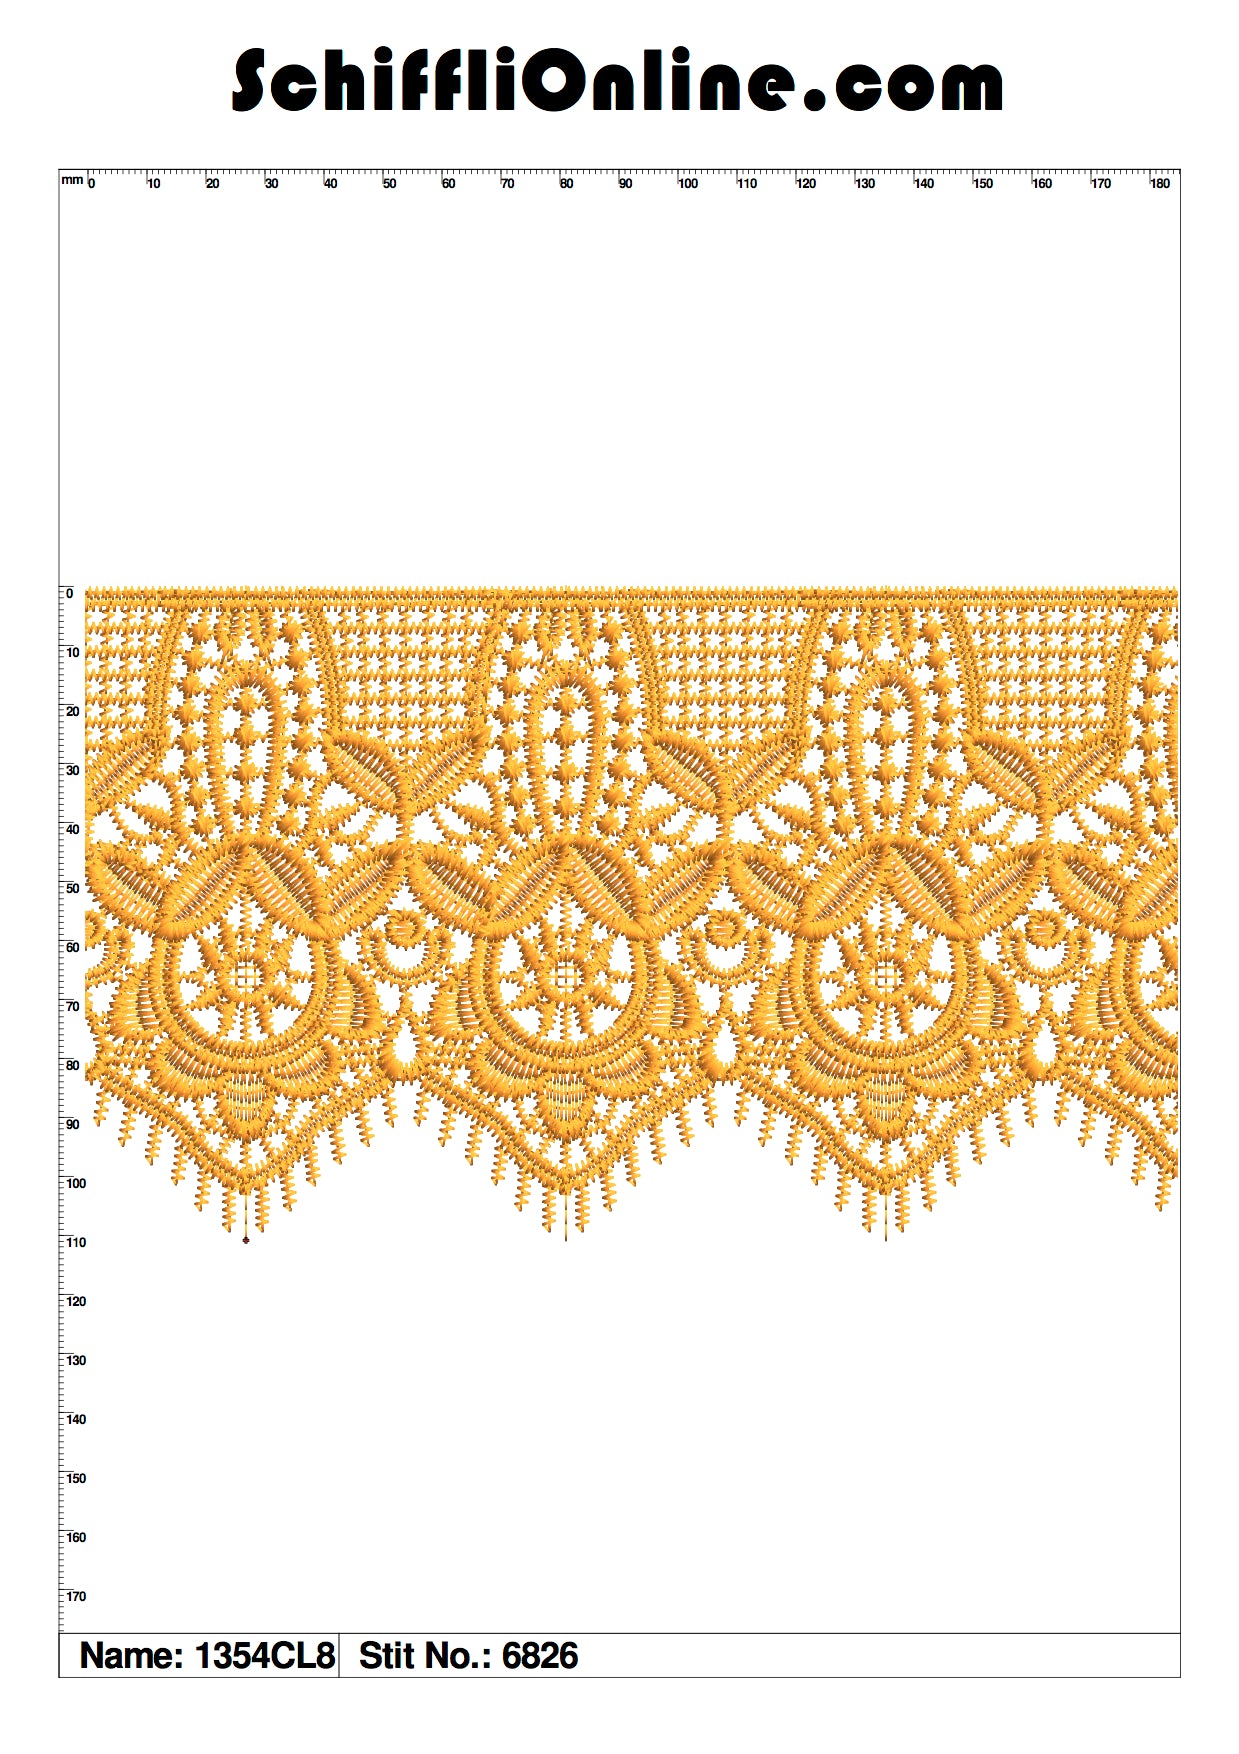 Book 144 CHEMICAL LACE 8X4 50 DESIGNS